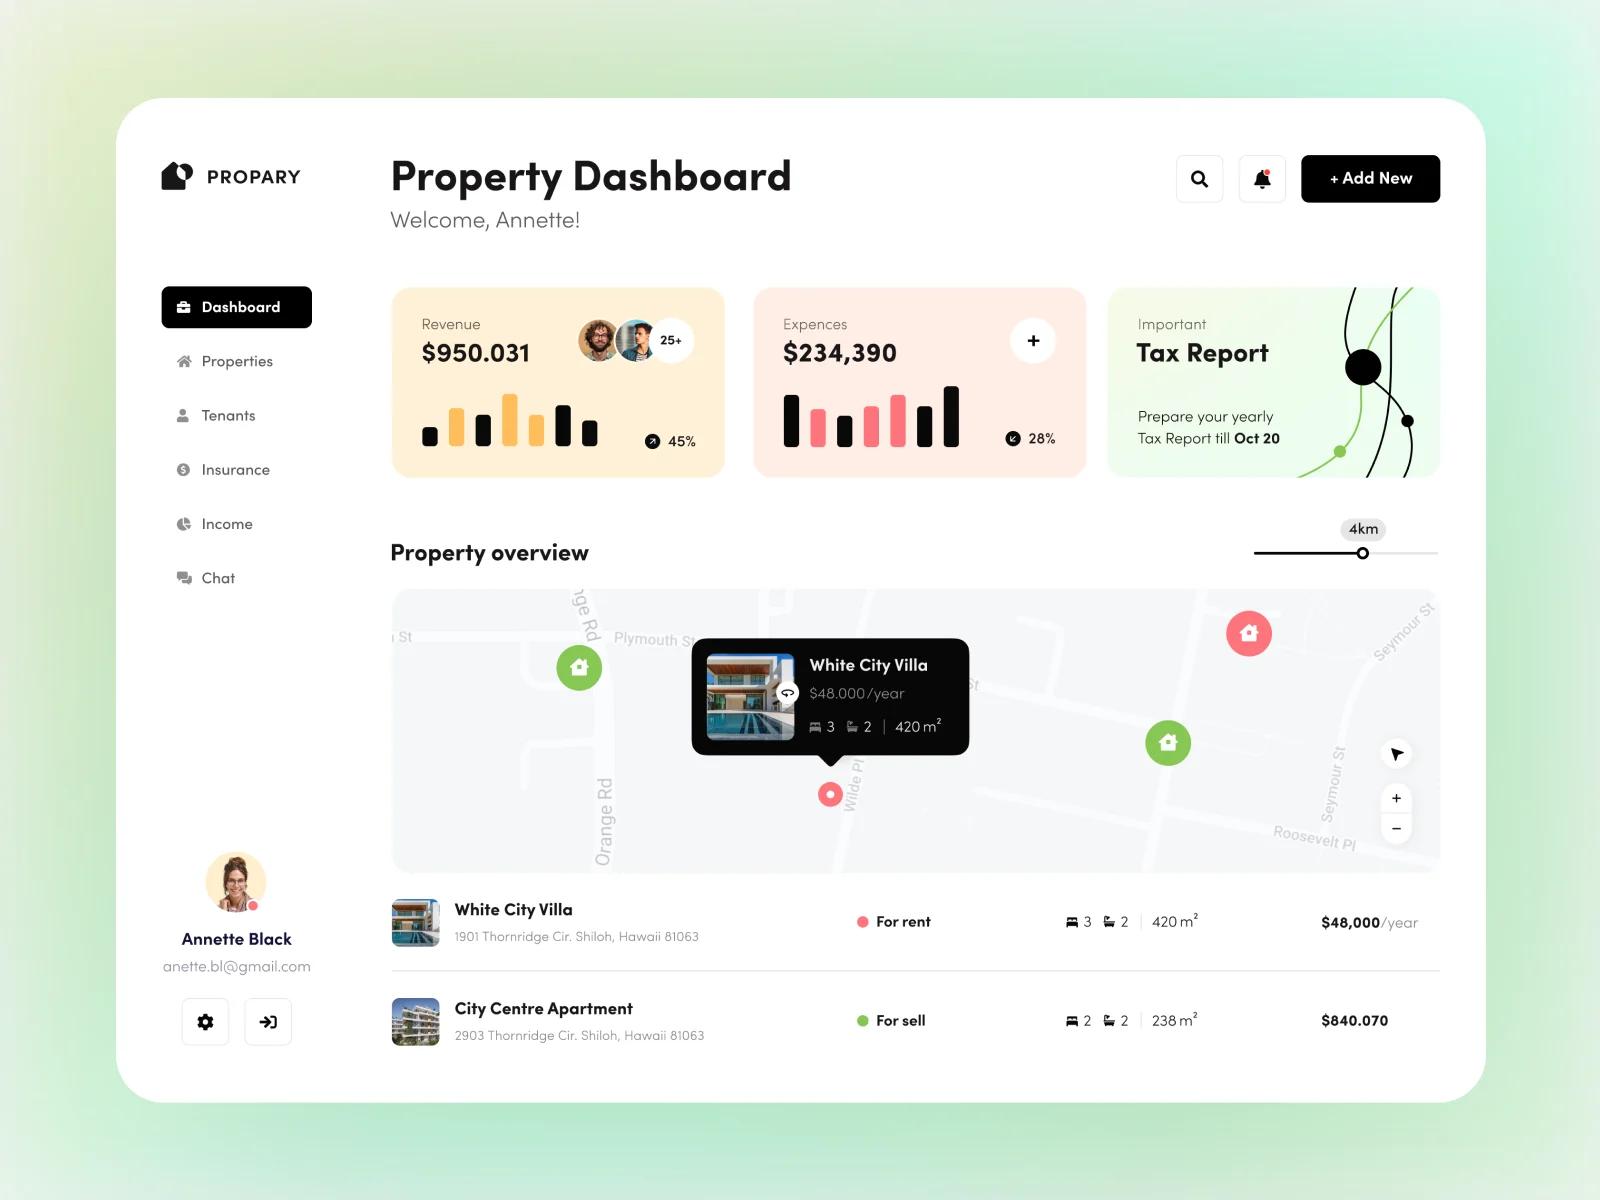 A real estate dashboard contains a lot of data organized in an orderly and easy-to-understand manner